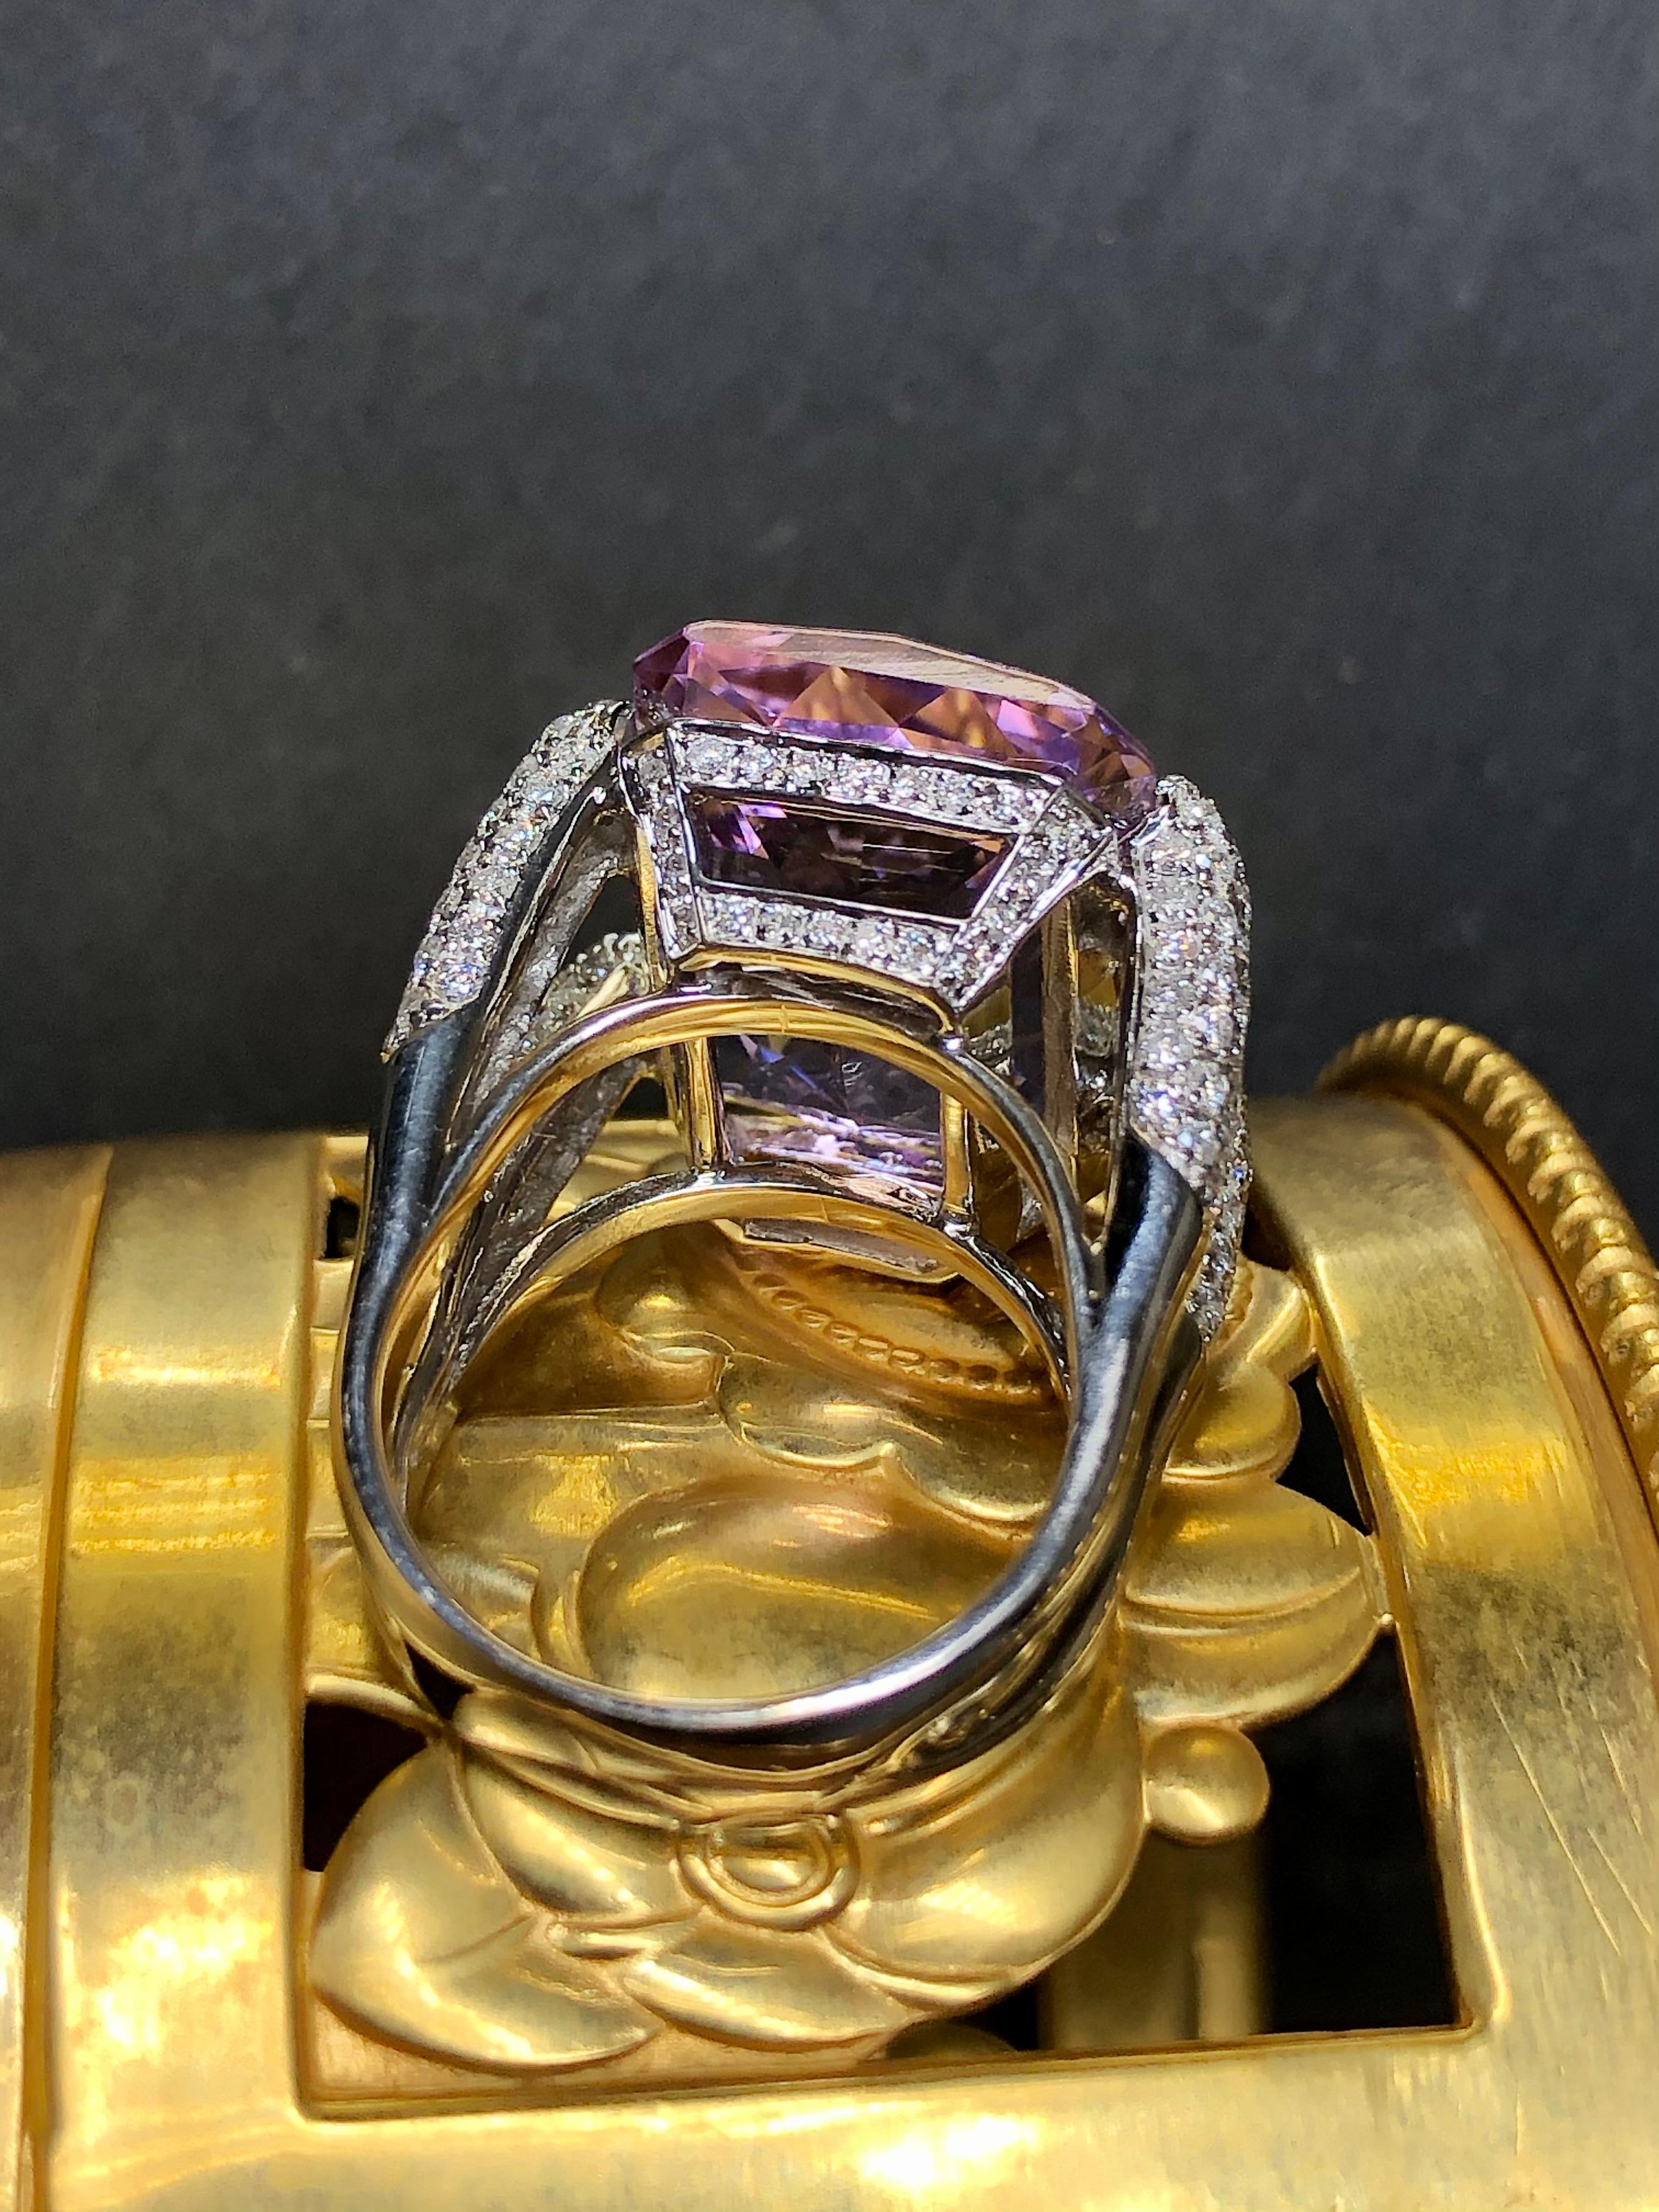 Estate 18K Fantasy Cut Amethyst Pave Diamond Cocktail Ring Sz 7 22.84cttw In Good Condition For Sale In Winter Springs, FL